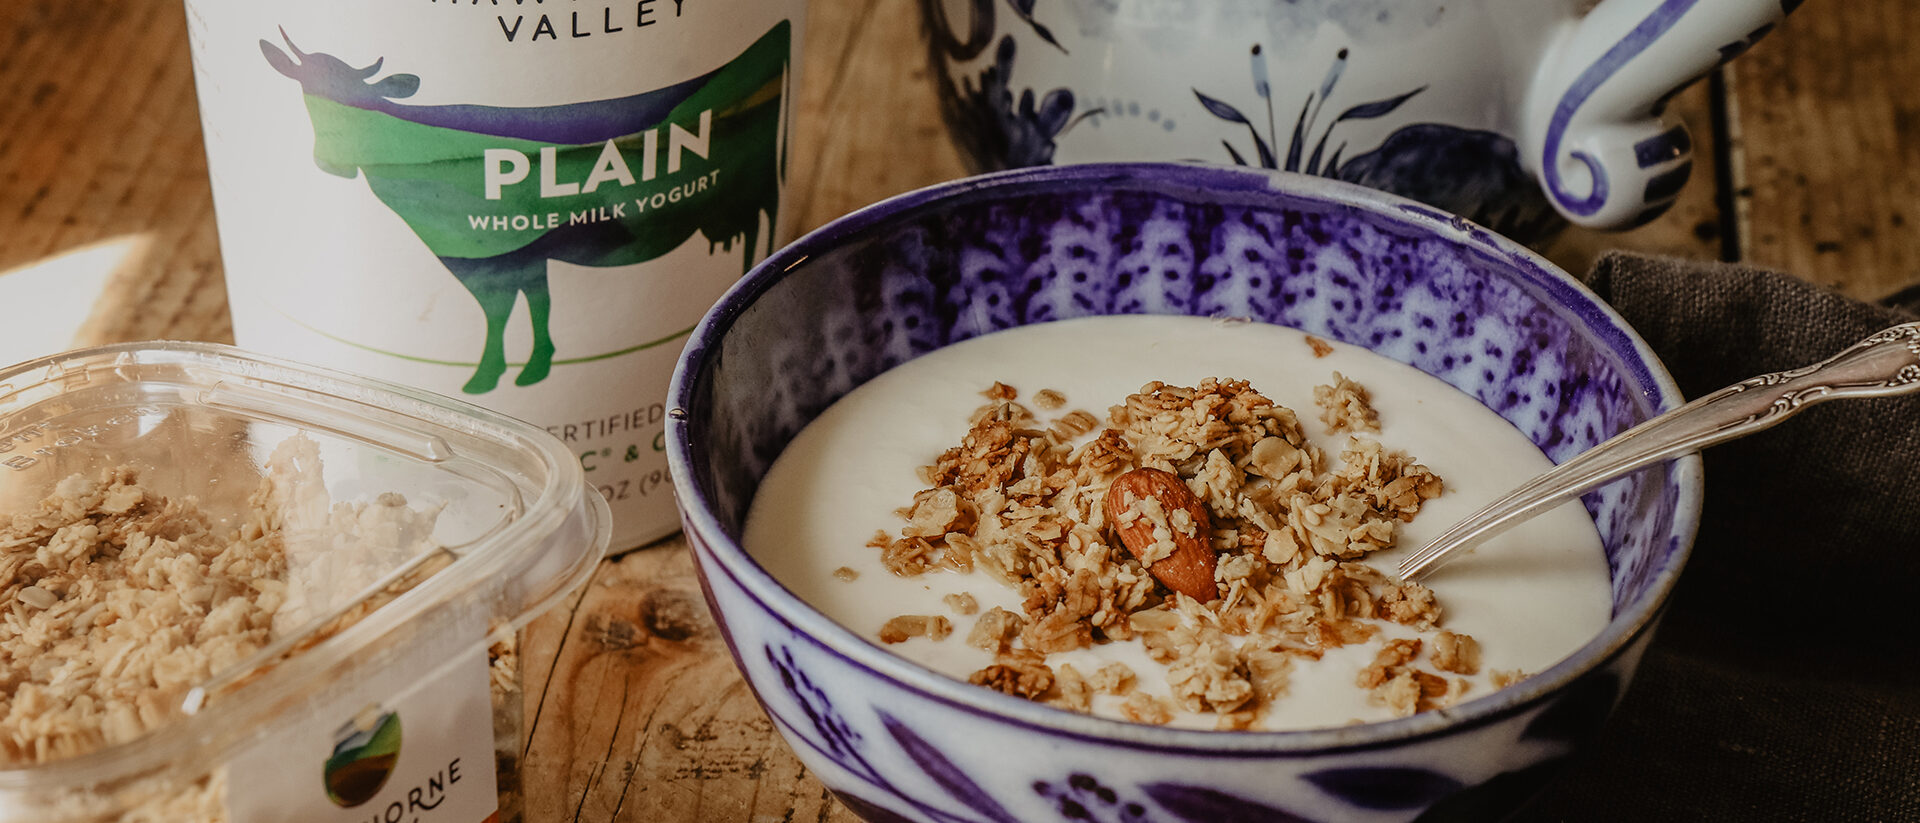 Hawthorne Valley plain yogurt container in the background with a blue and white bowl filled with yogurt and topped with Hawthorne Valley honey almond granola a package of which can be seen in the lower left hand corner